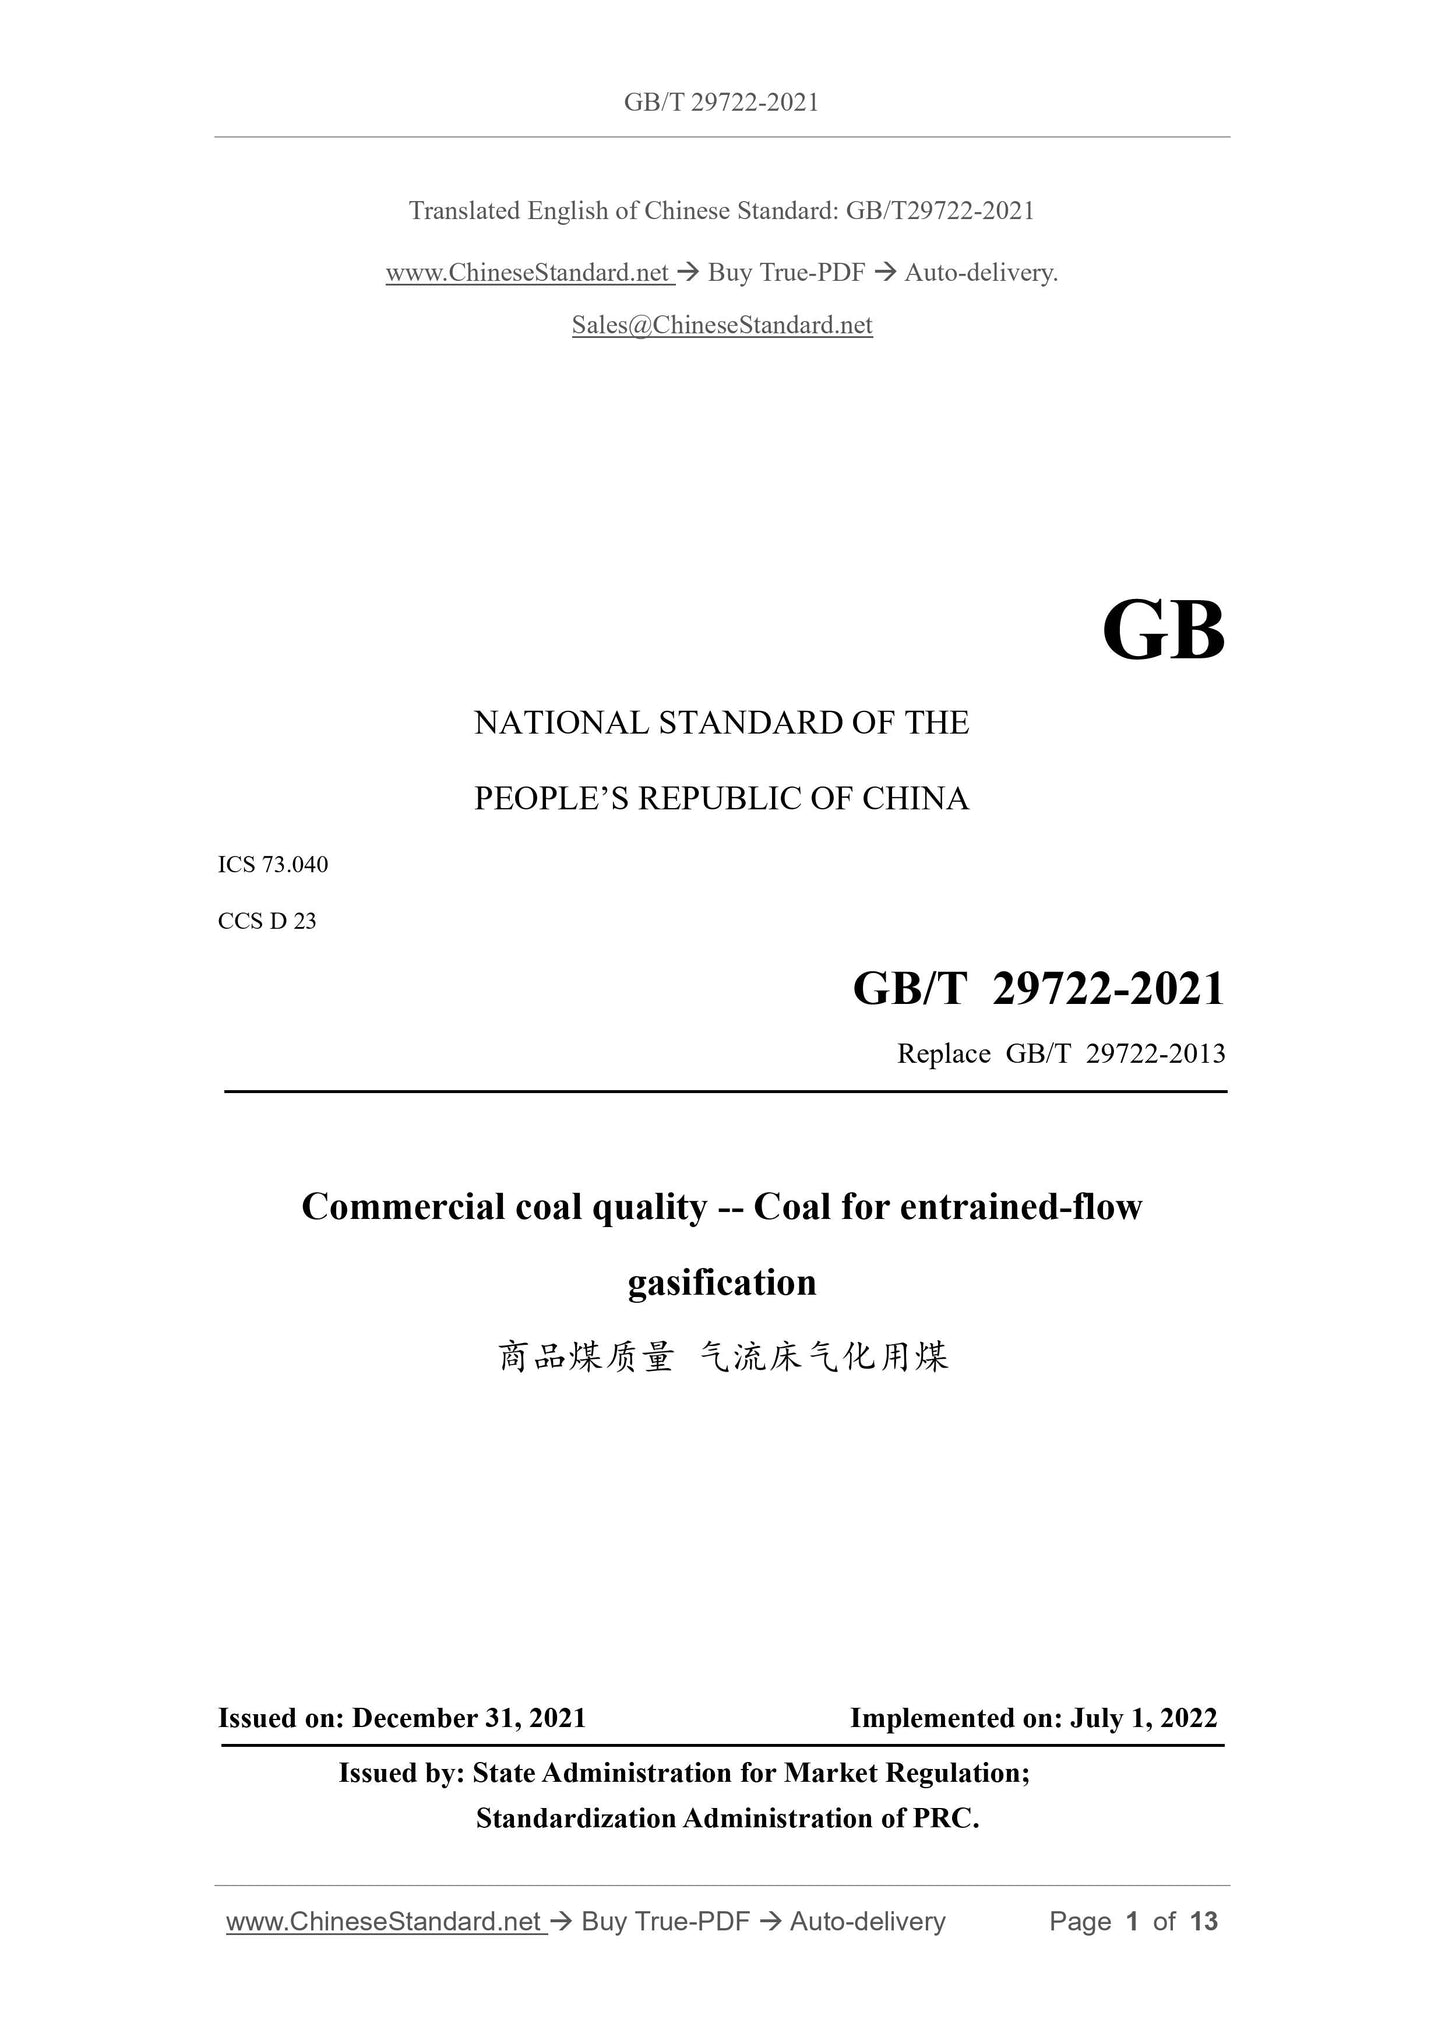 GB/T 29722-2021 Page 1